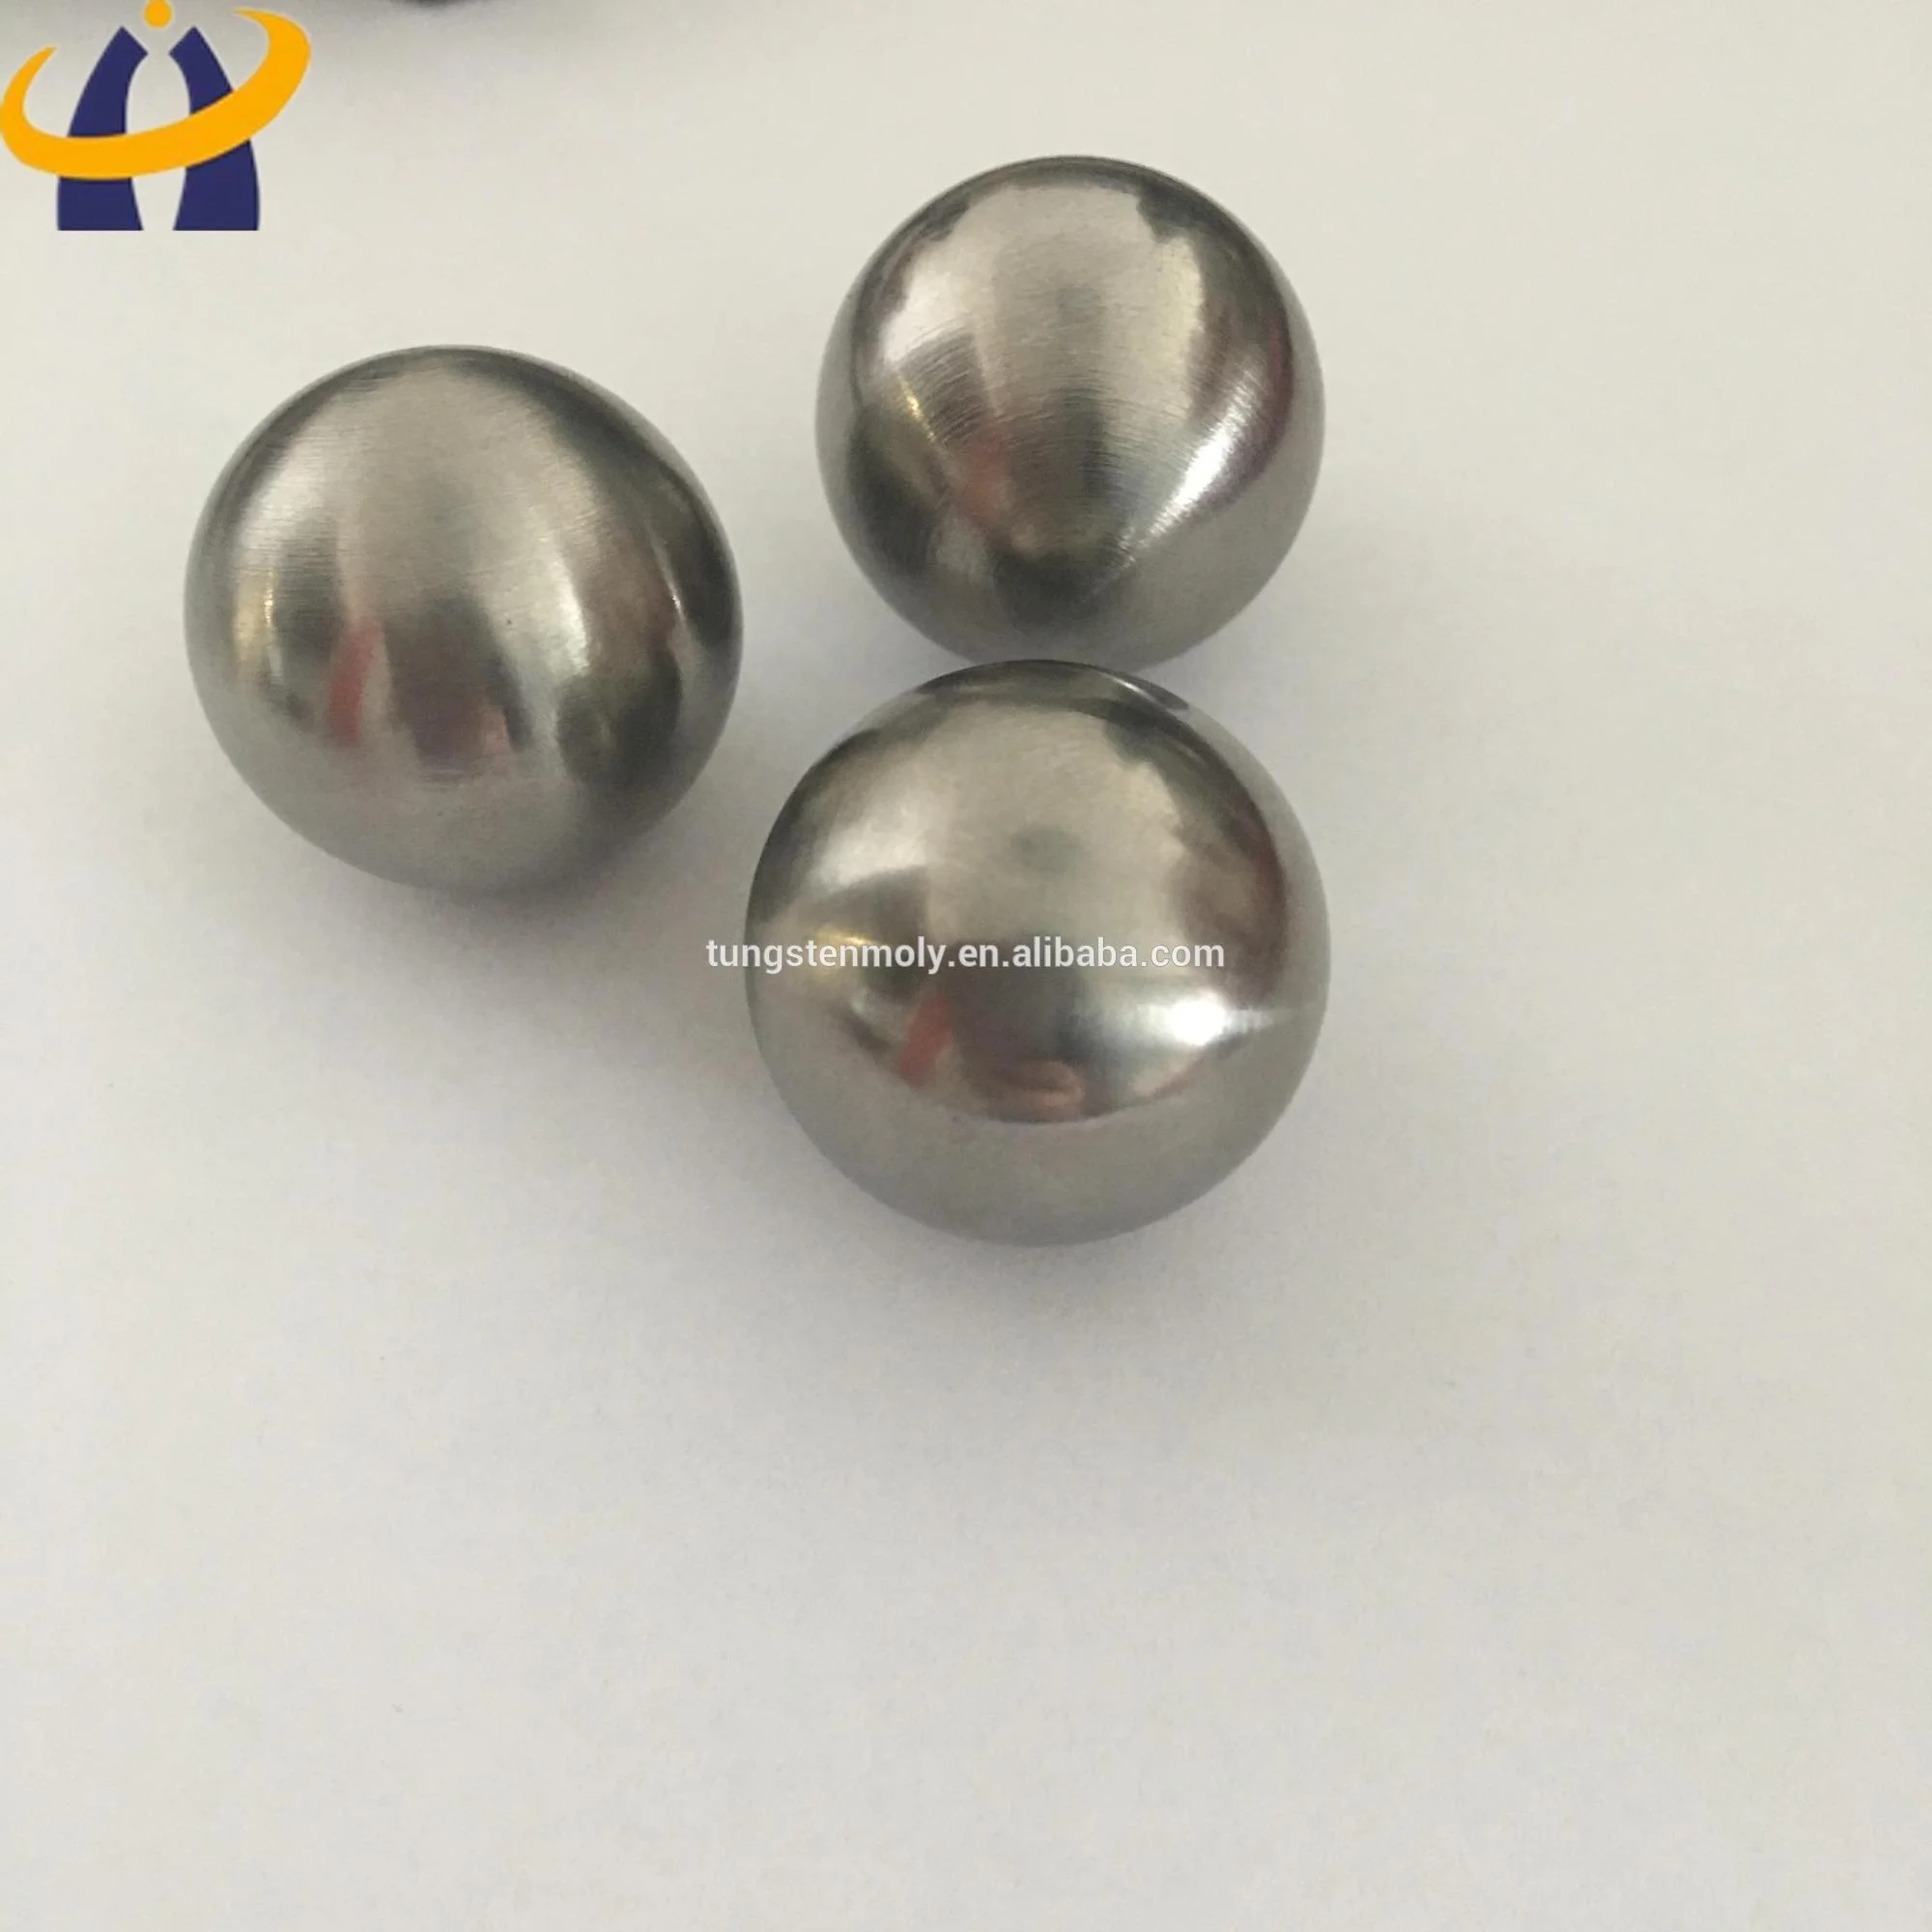 25mm Tungsten Sphere Ball incl stand 